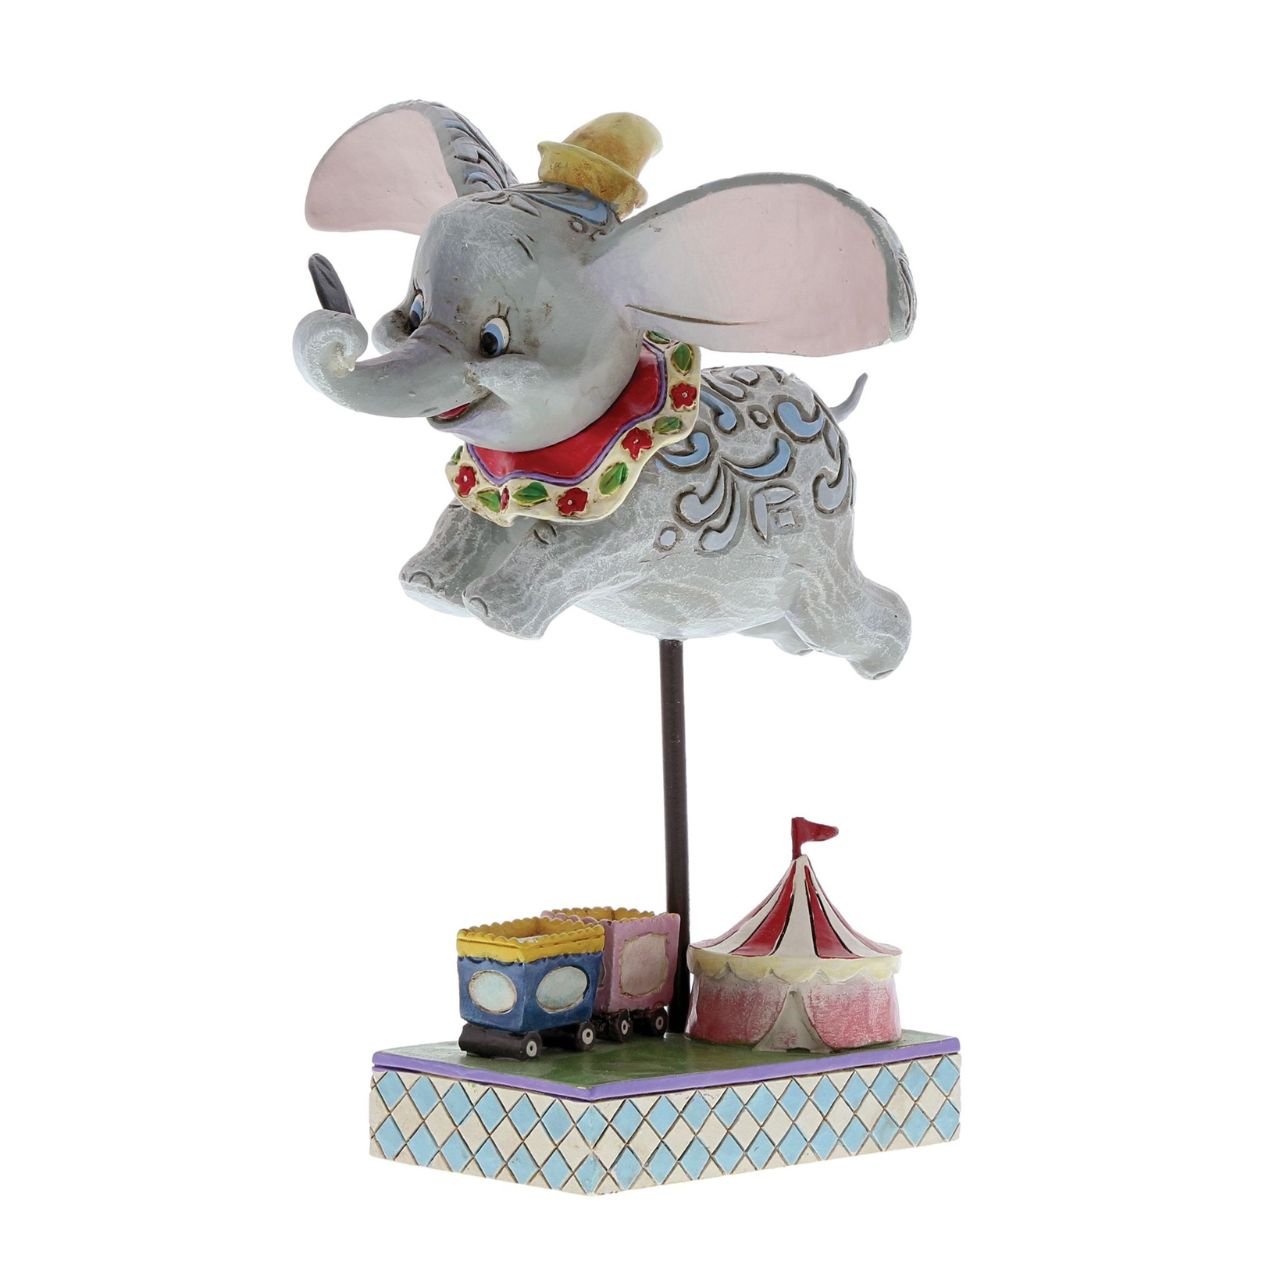 Jim Shore Dumbo Faith in Flight Figurine  Faith in Flight (Dumbo Figurine)  Disney Traditions combines the magic of Disney with the American folk artistry of Jim Shore. Enjoy this wonderful figurine of beloved Dumbo as he takes his first flight with the help of a magical feather.